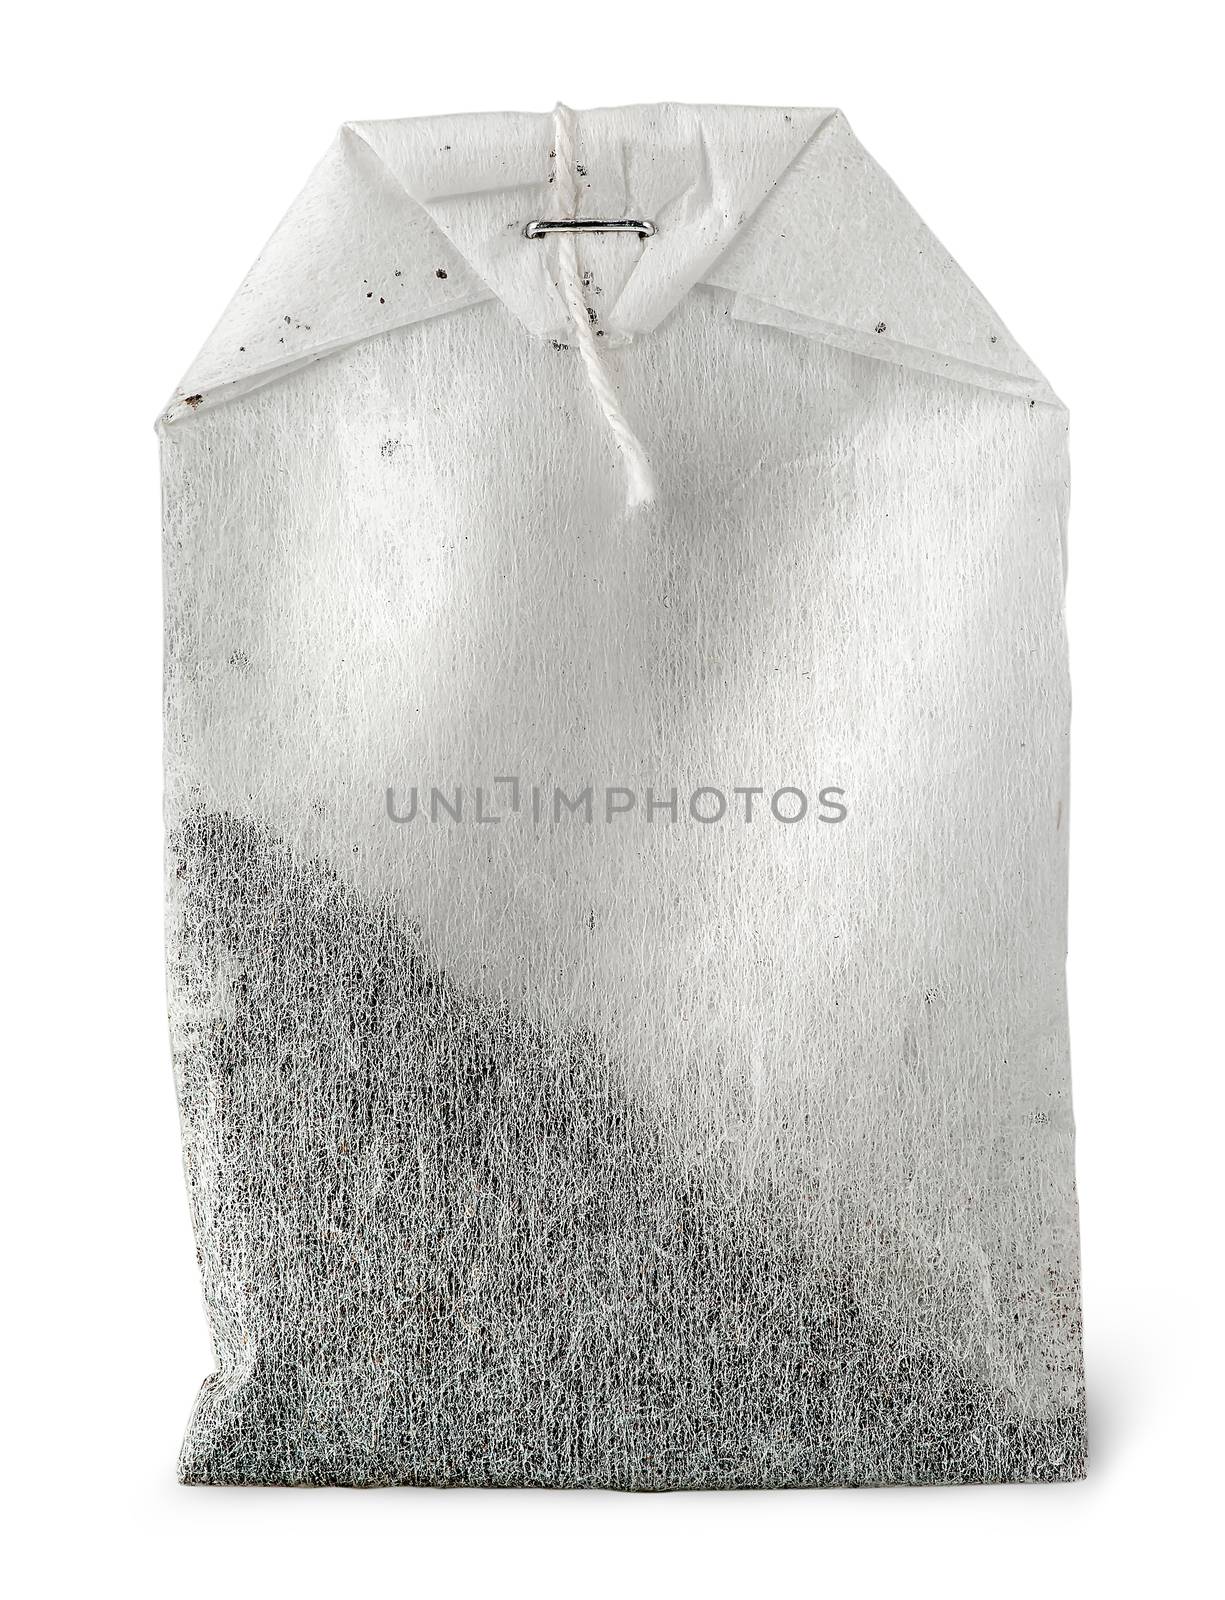 In front single tea bag with thread isolated on white background